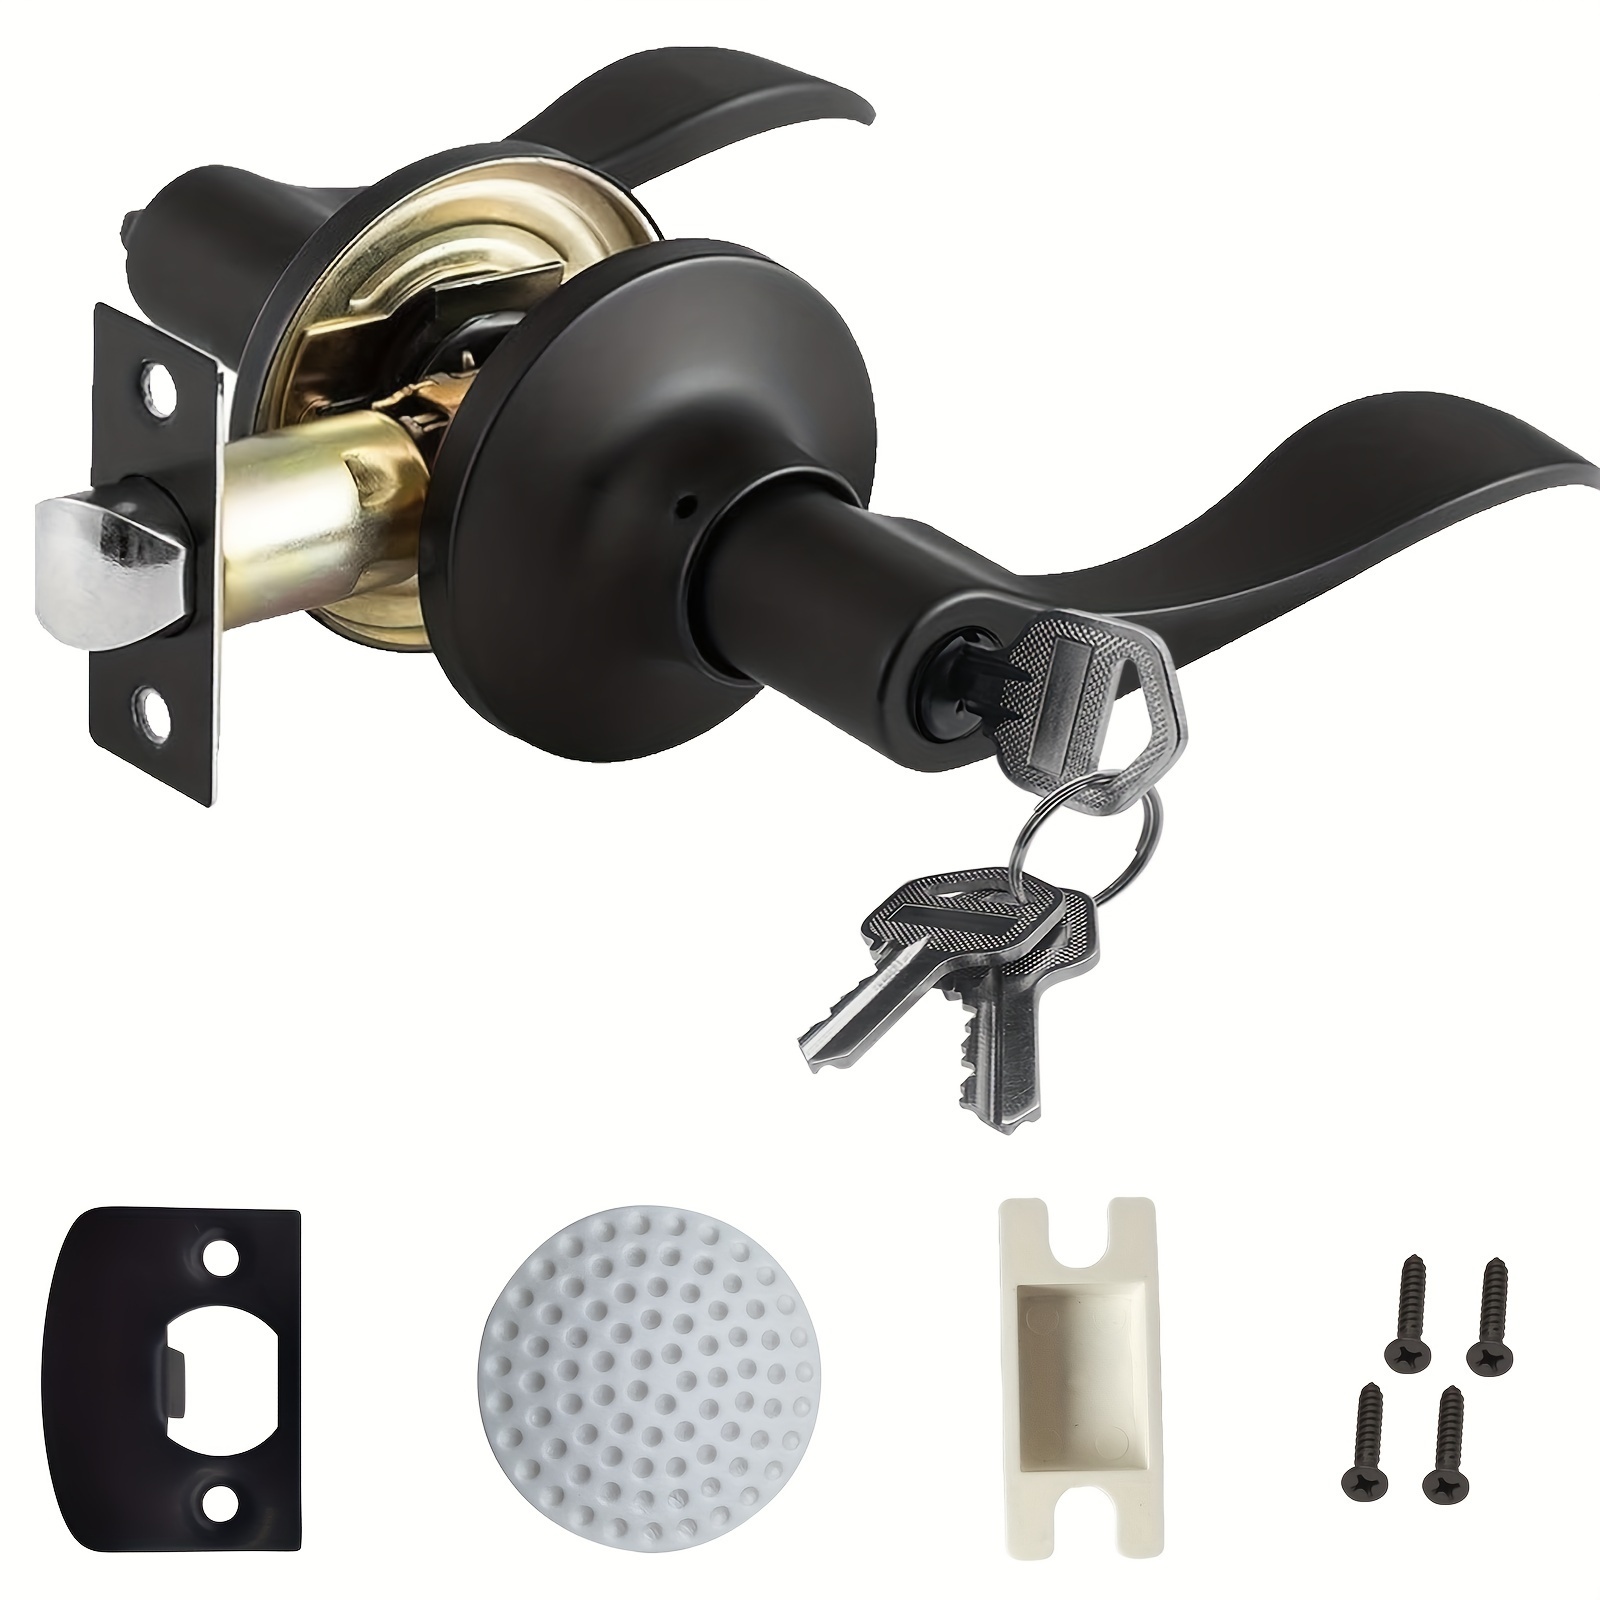 

Heavy-duty Black Metal Door Handle With Key And Lock - Durable, Easy Install For Home & Office - Painted Copper Finish